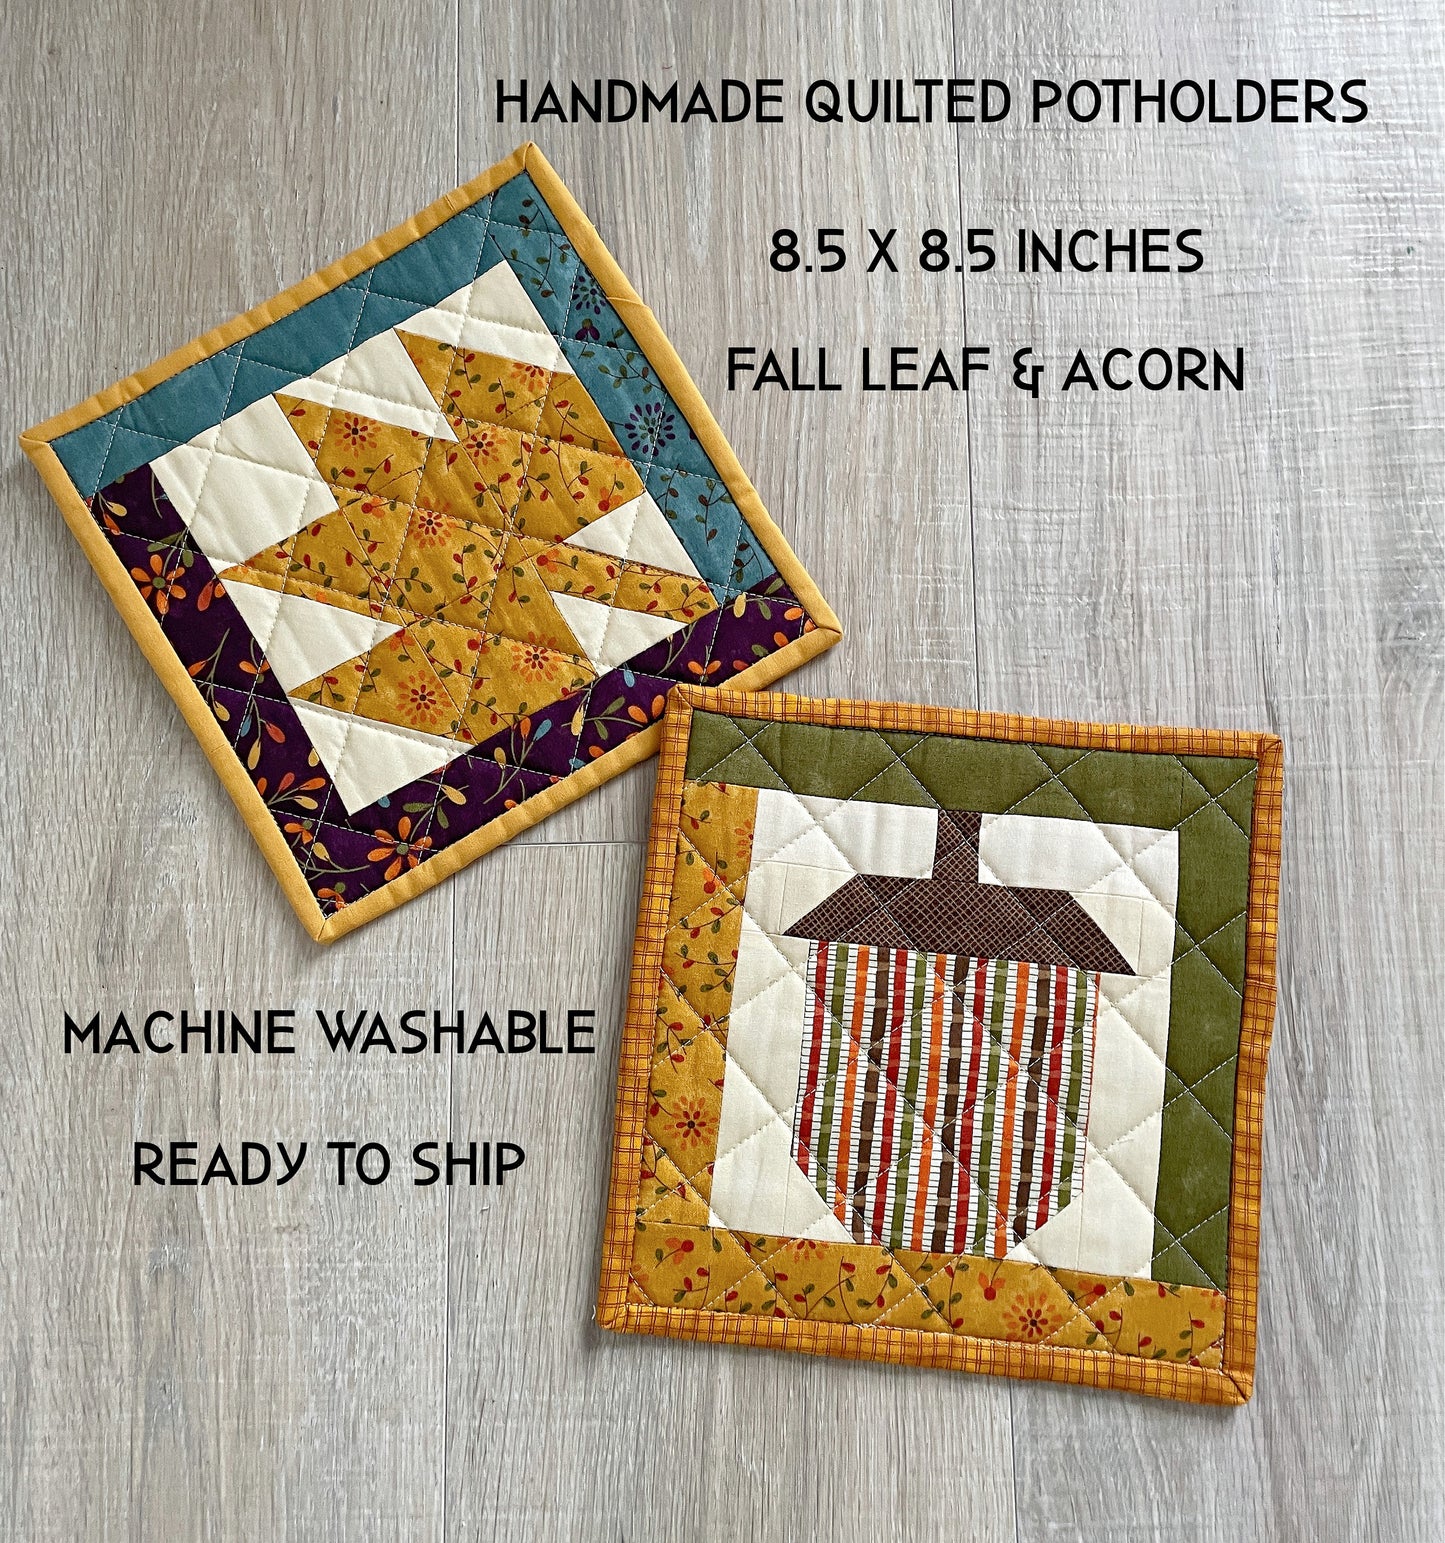 Set of 2 Handmade Quilted Potholders for Fall Kitchen Decor